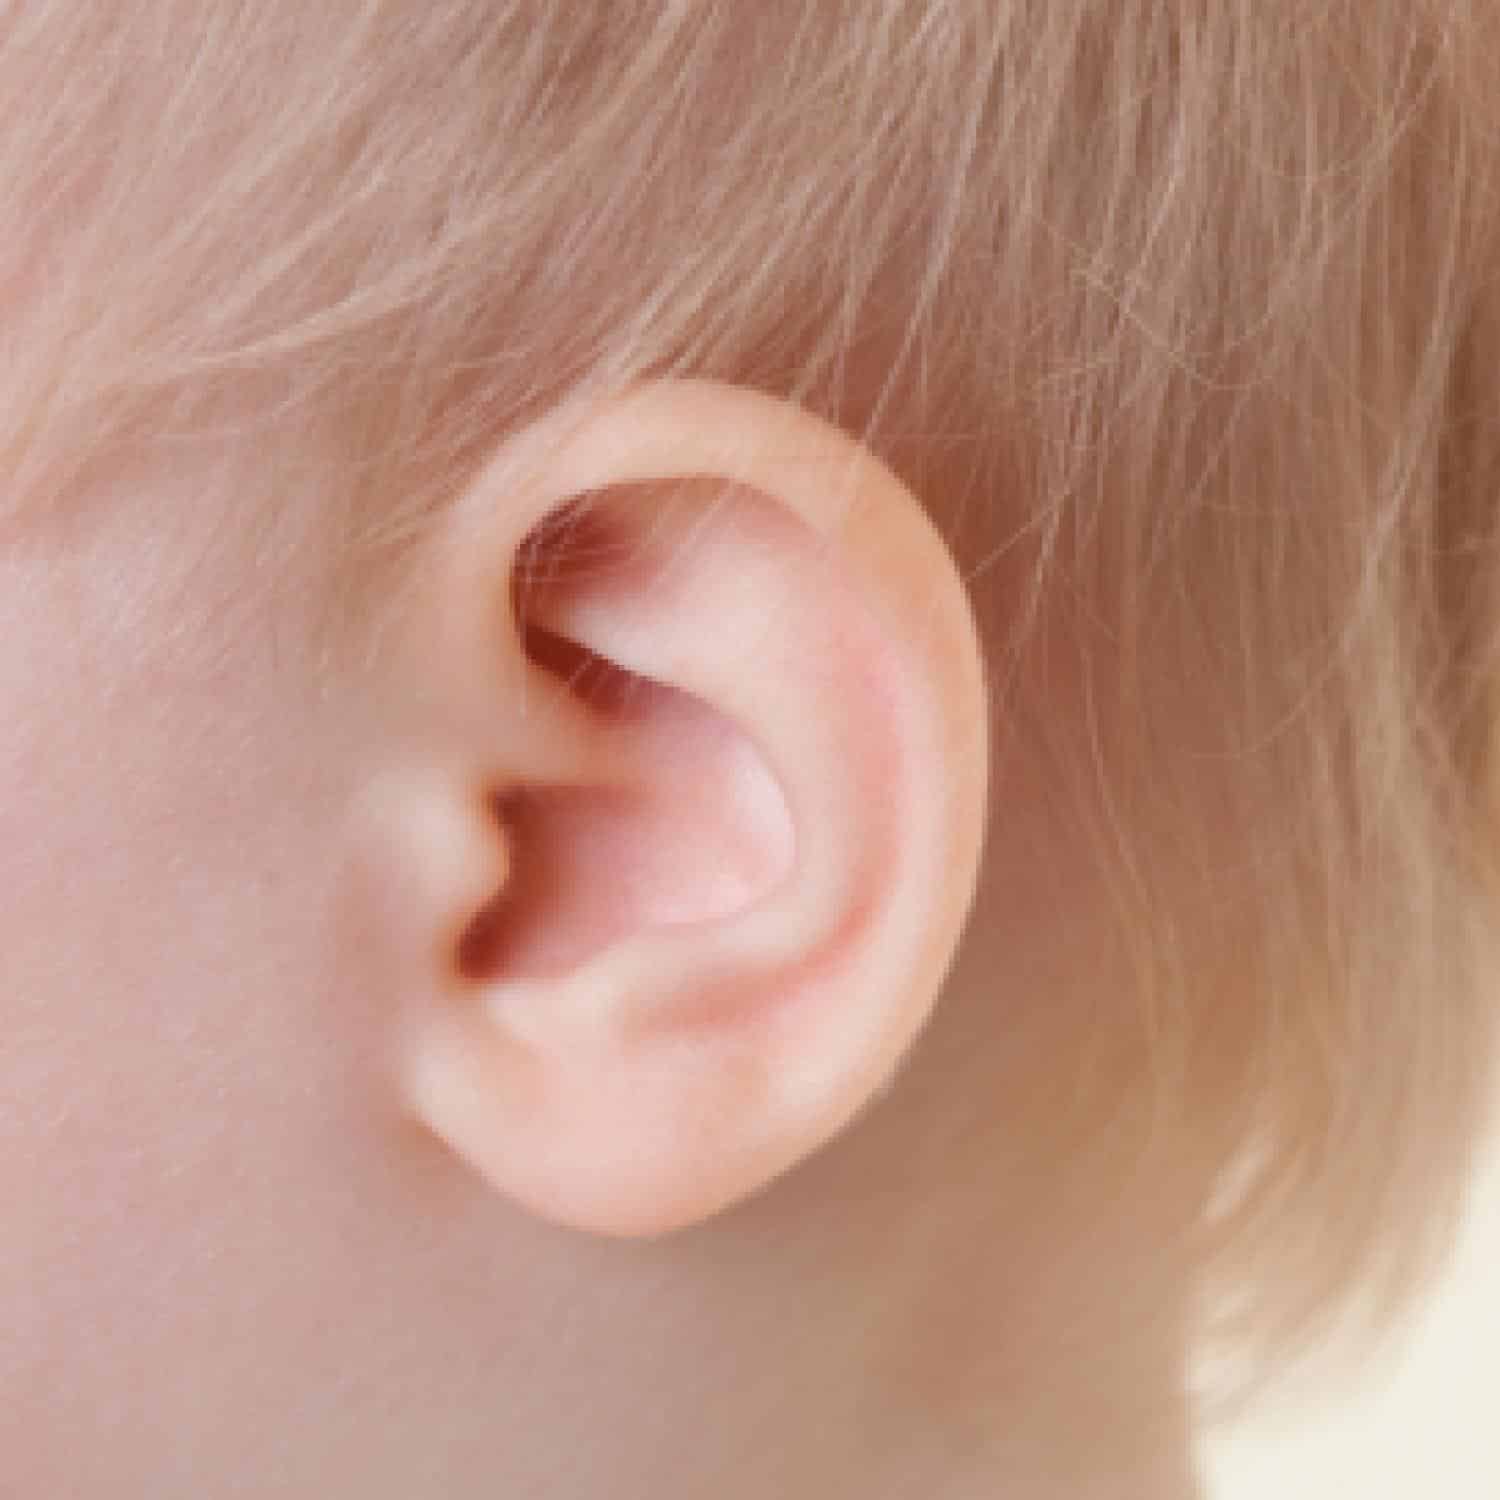 New Guidelines for Ear Infection Treatment